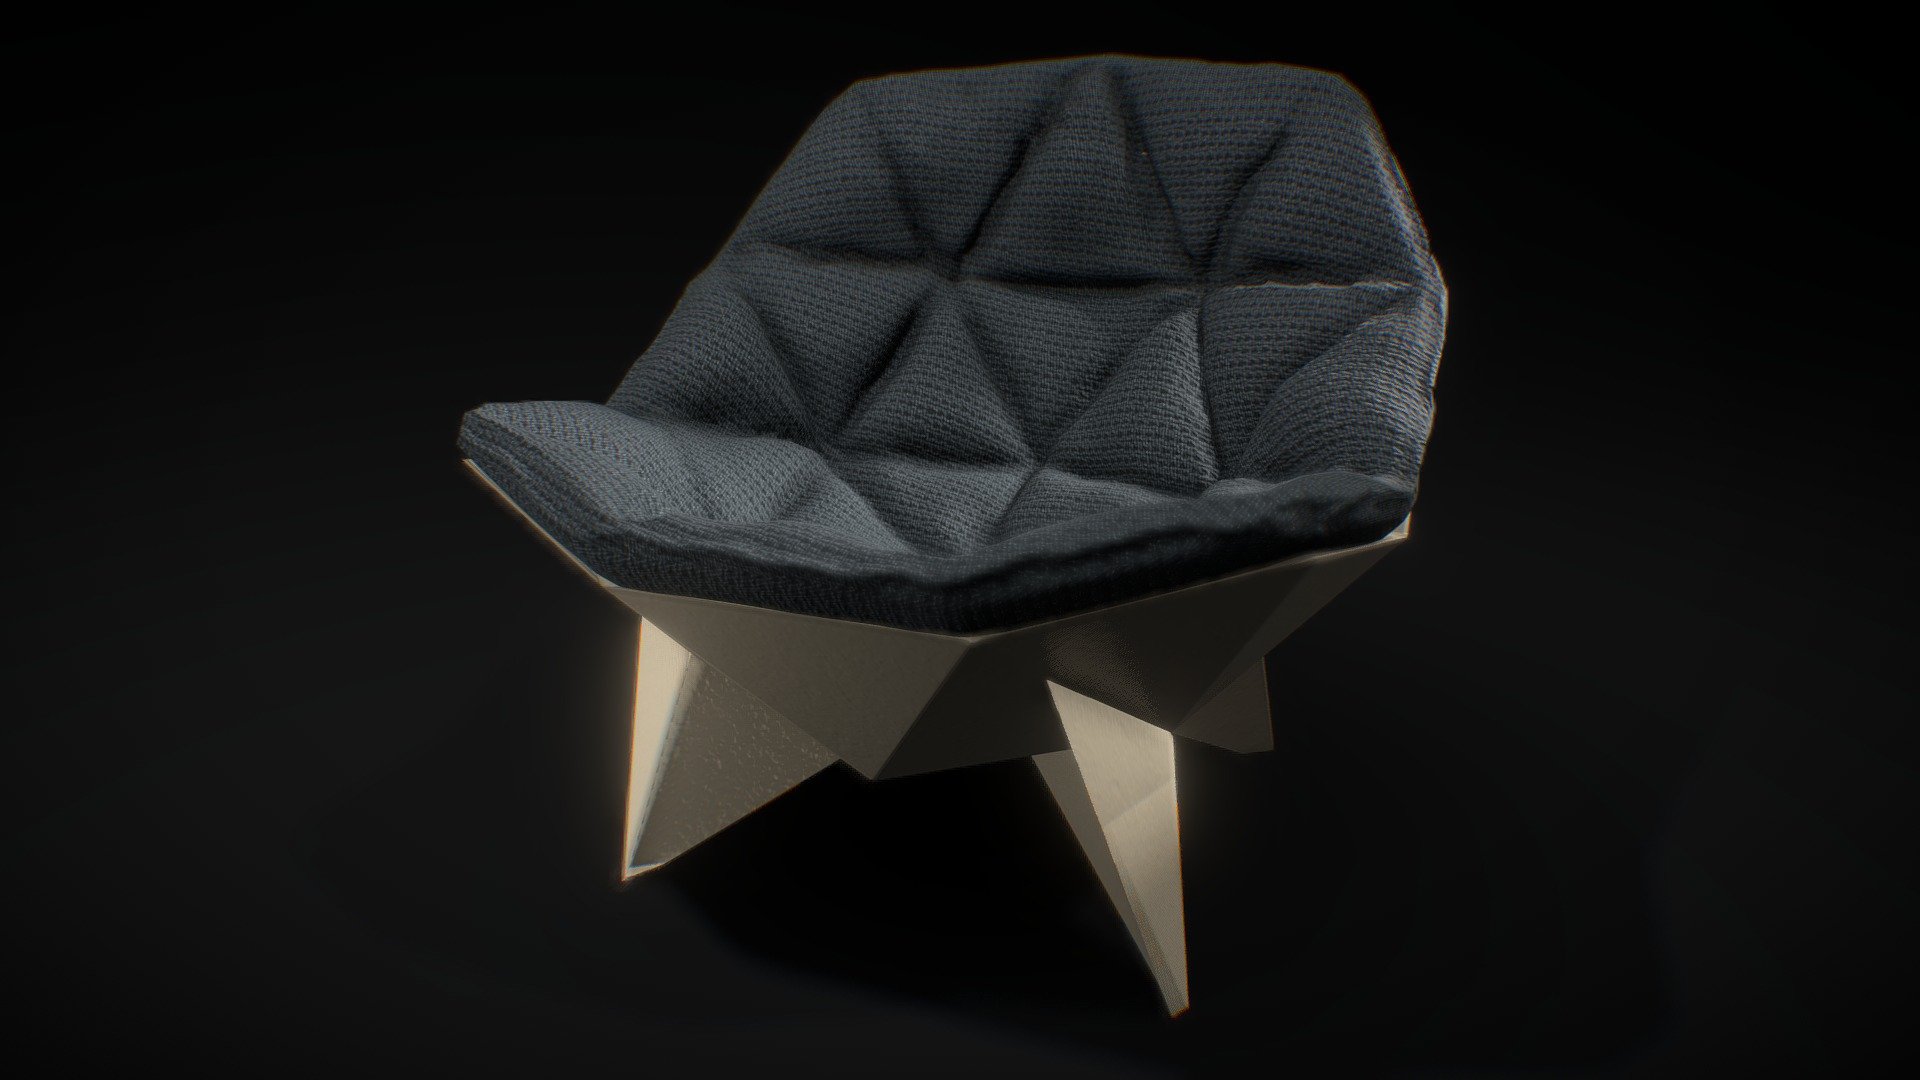 A cool chair I saw online, couldn't get the source
Used for an environment design - Cool chair - 3D model by Alx cm (@tacotown5) 3d model